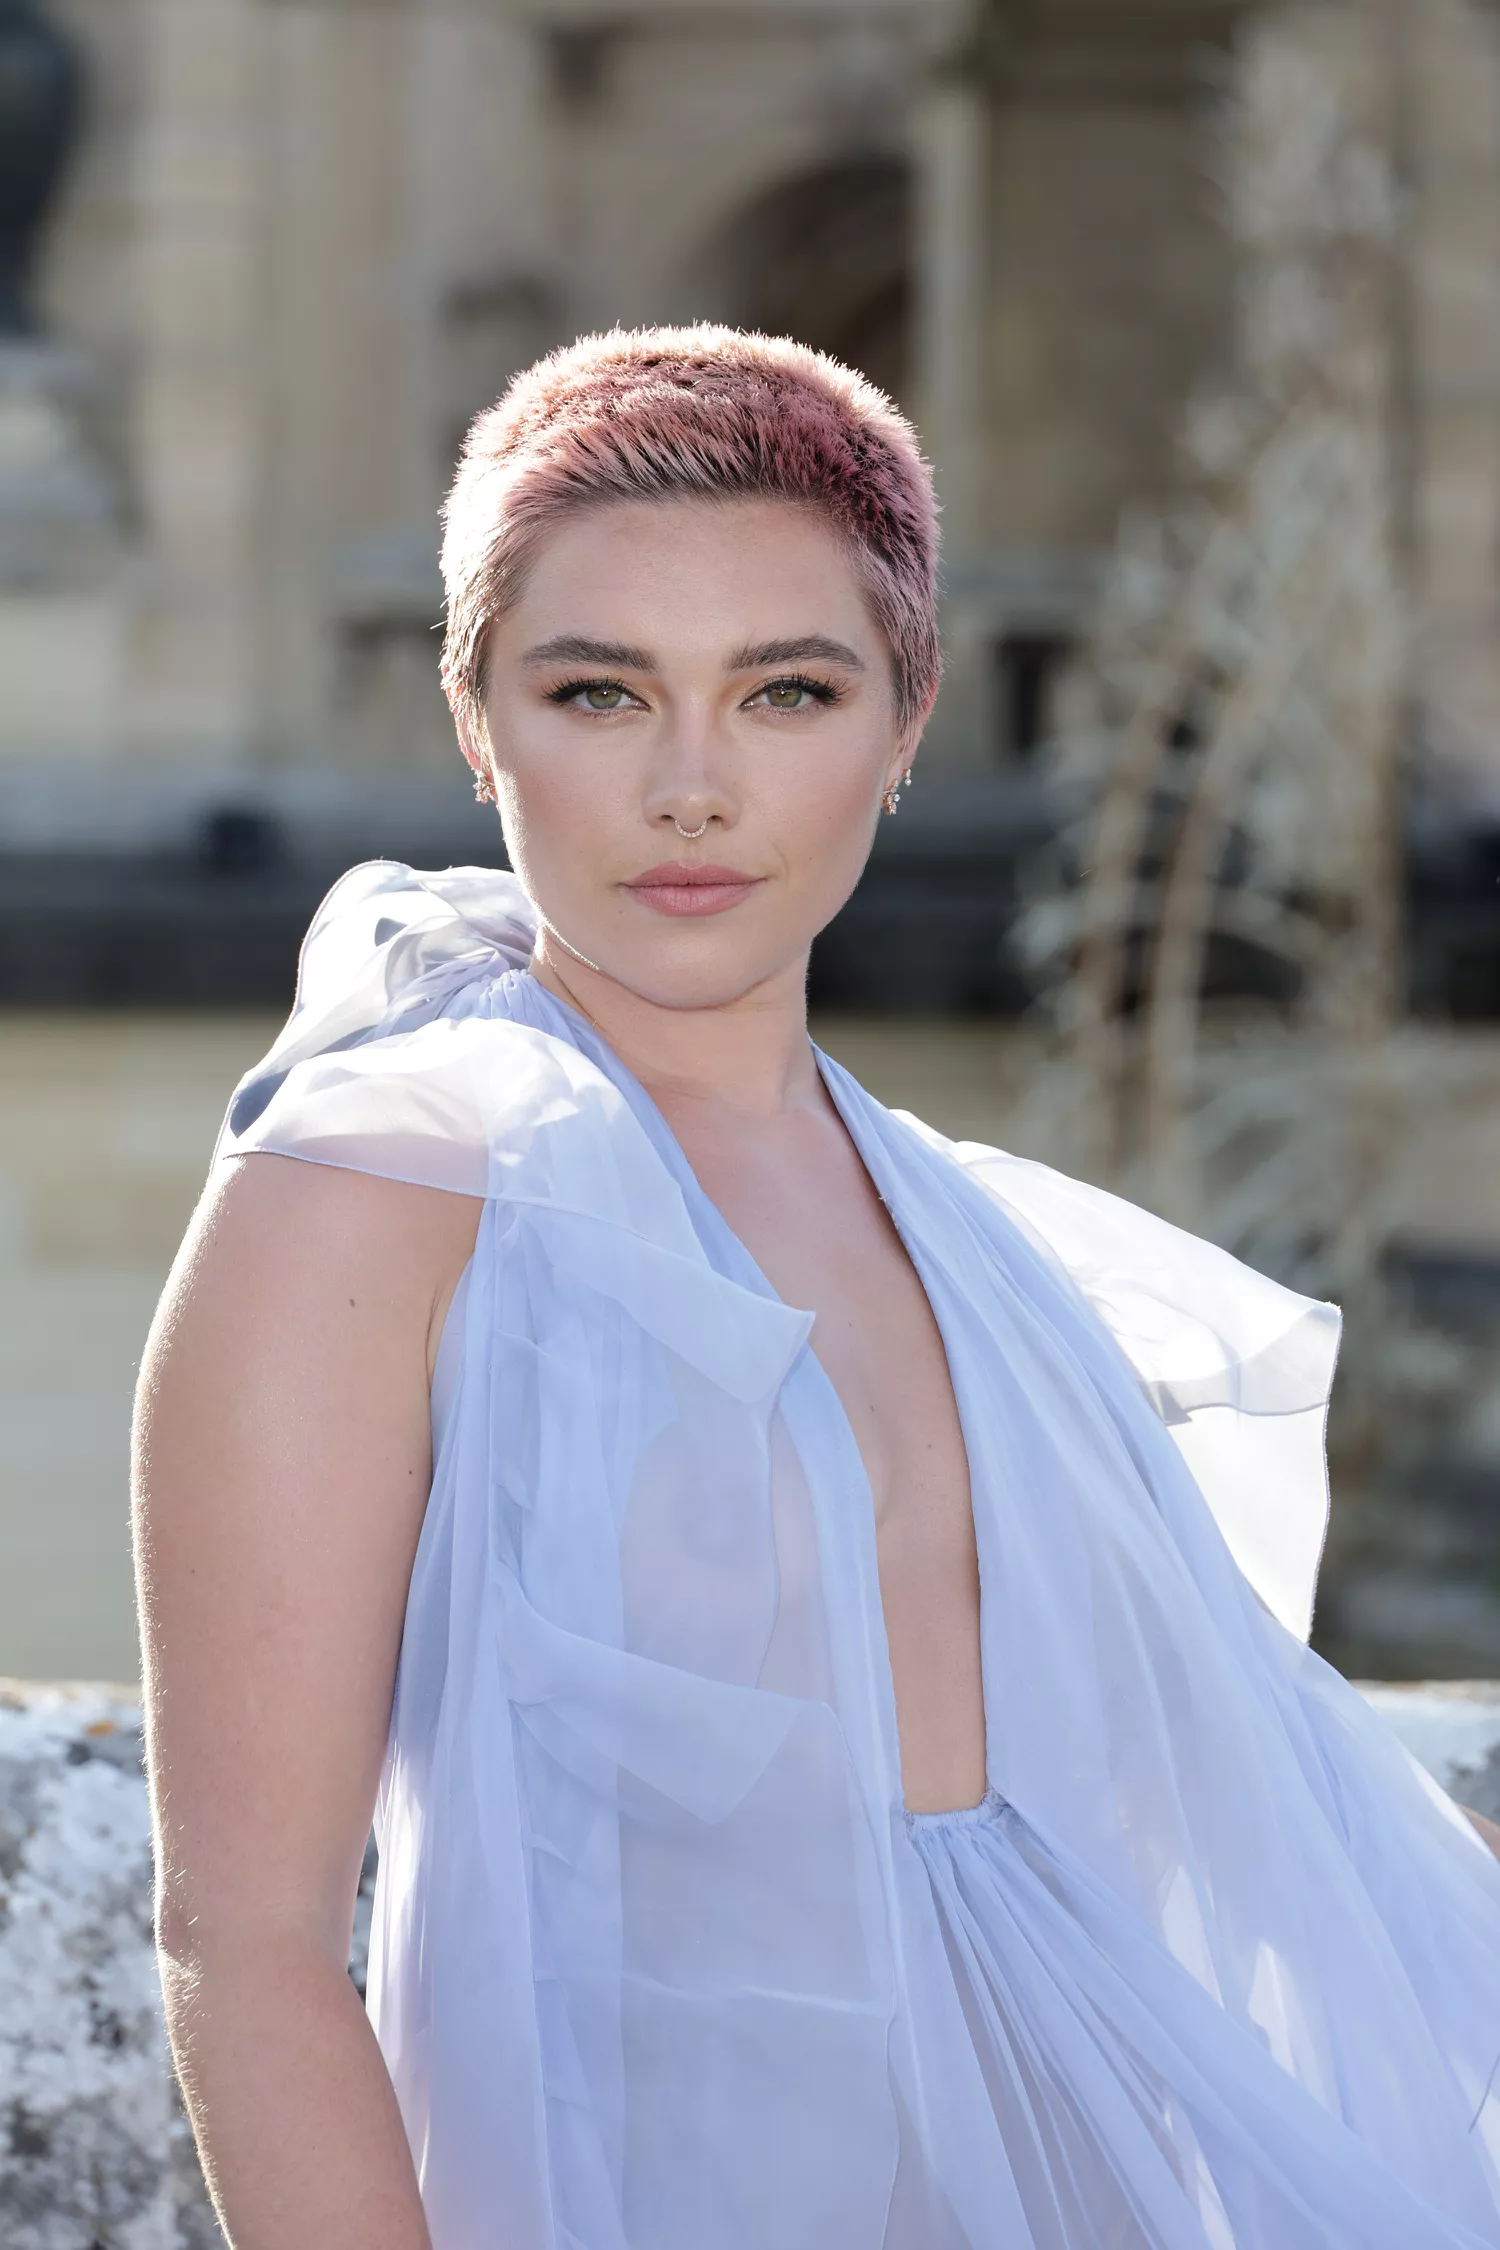 Florence Pugh Valentino Haute Couture Fall/Winter 2023/2024 Paris Fashion Week Sheer Lilac Dress and Pink Buzzcut